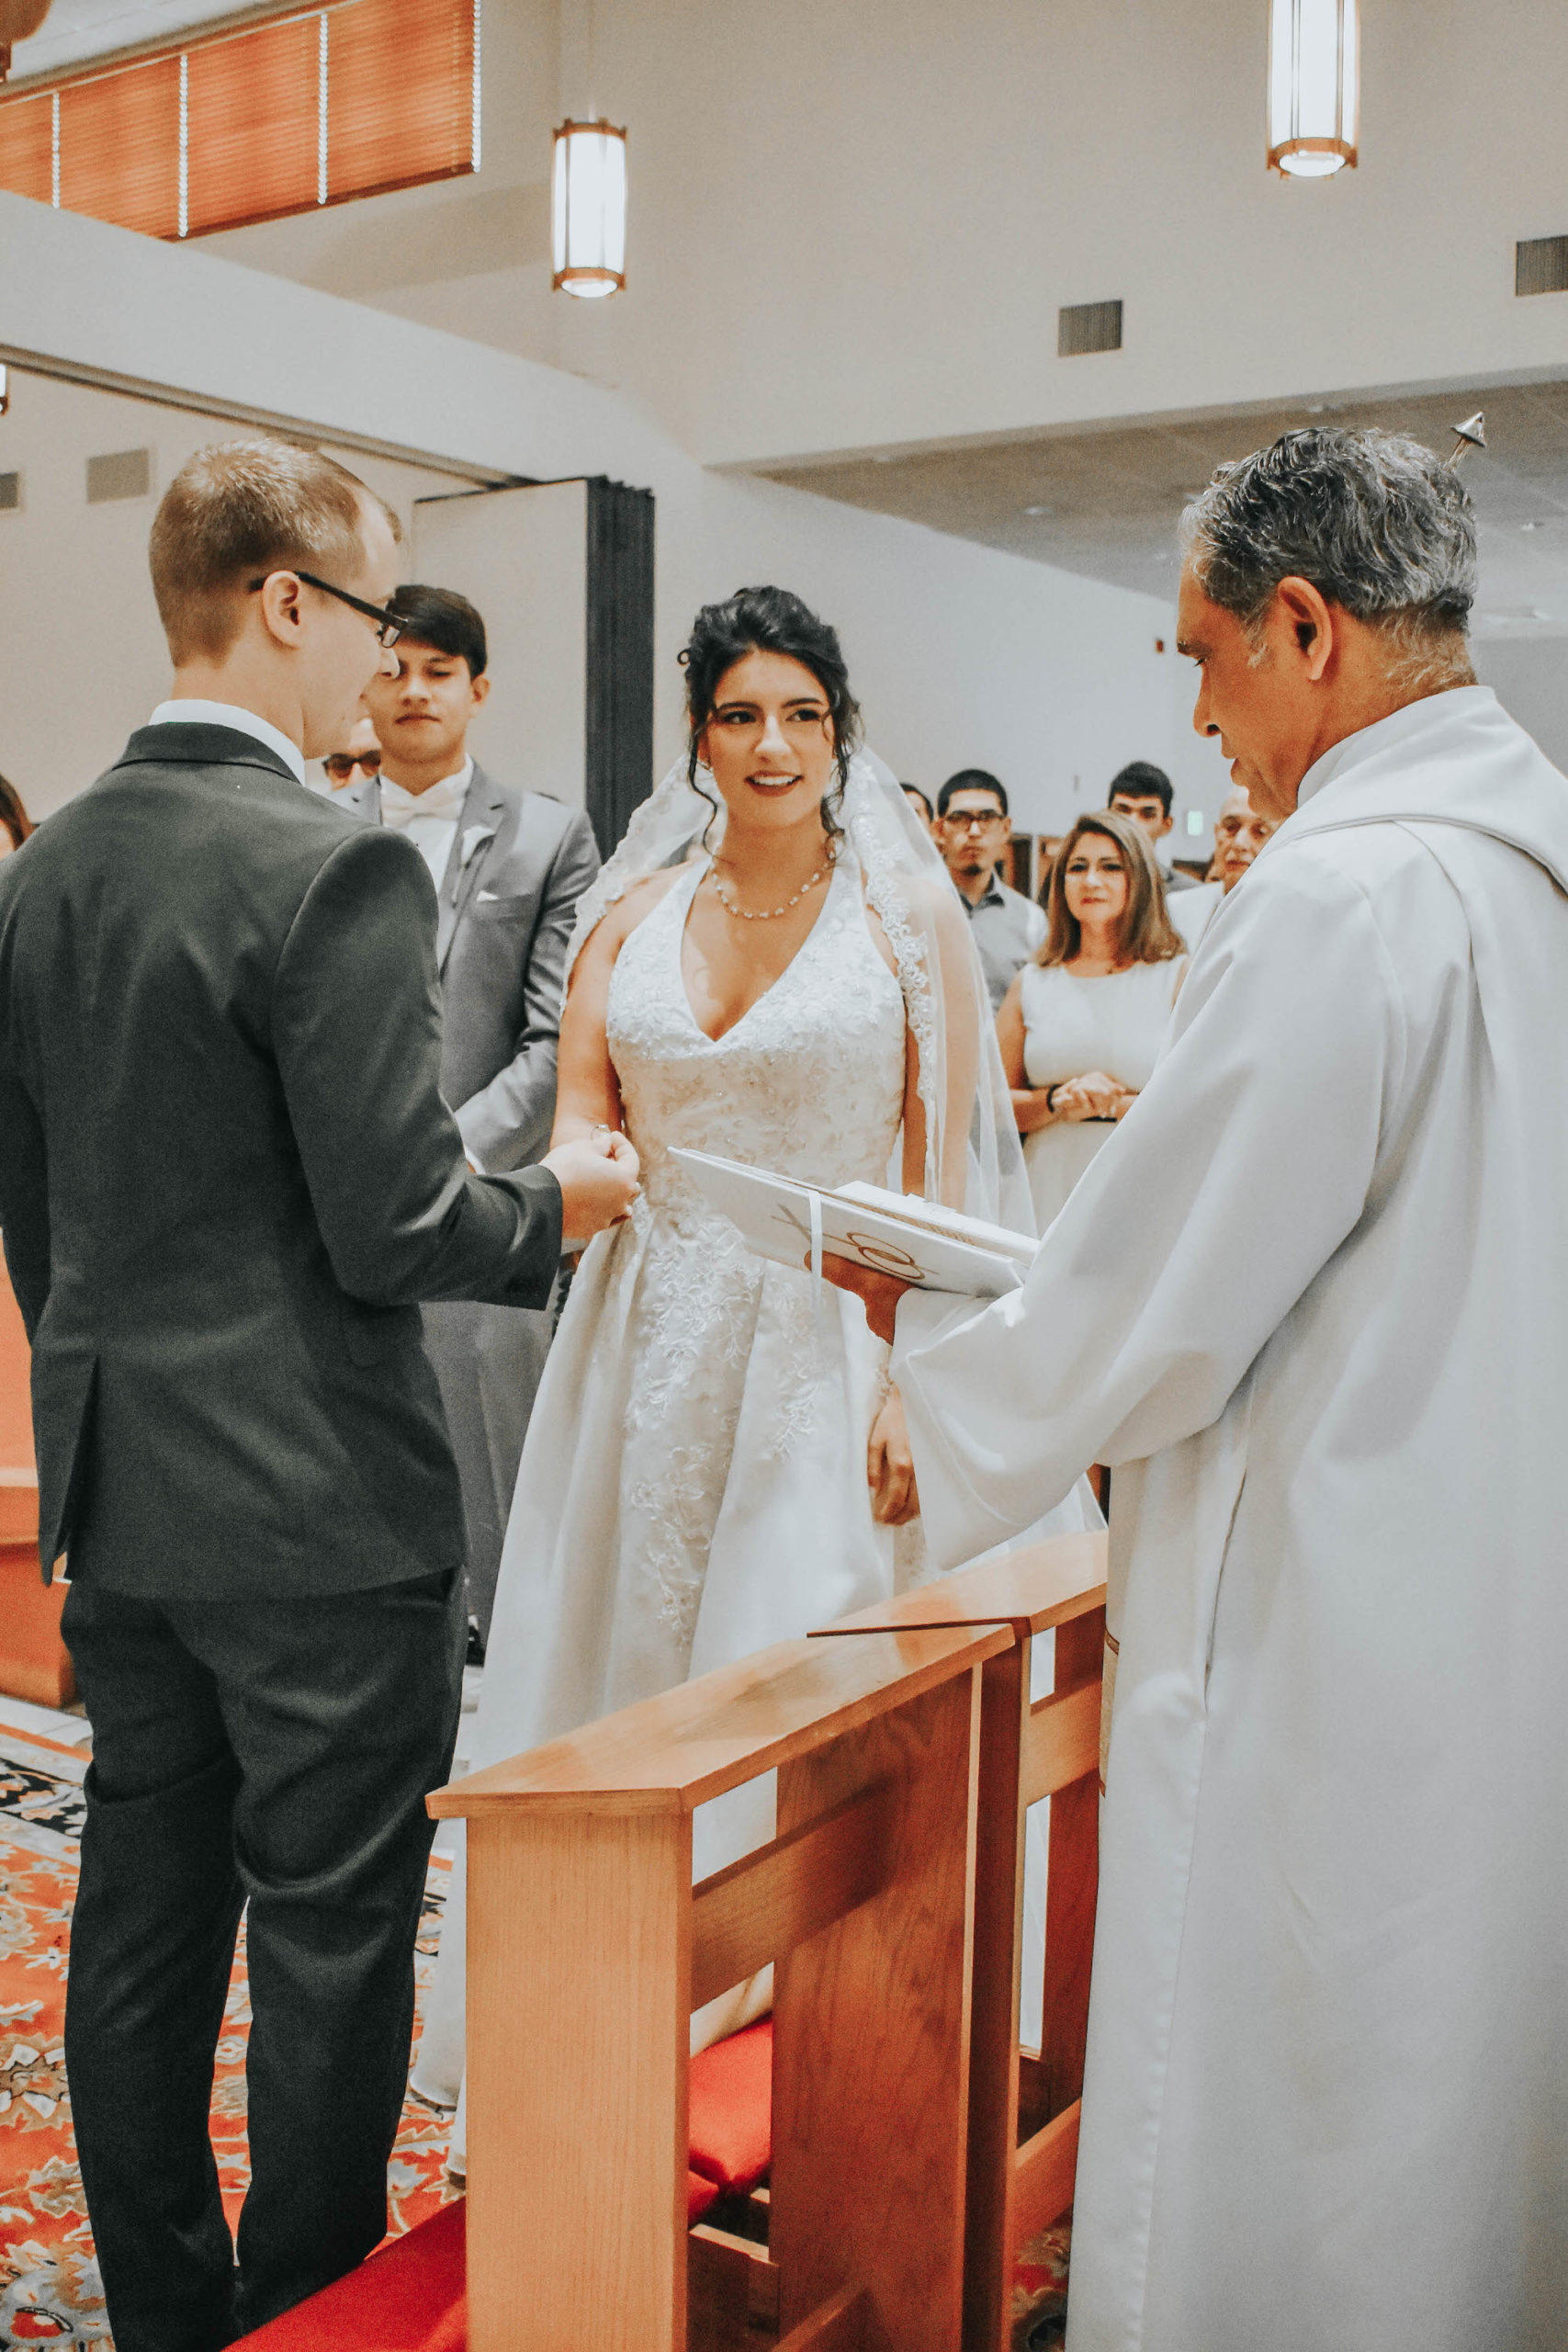 Florida Bride and Groom Exchange Vows and Hold Hands during Classic Church Wedding Ceremony in Tampa Bay